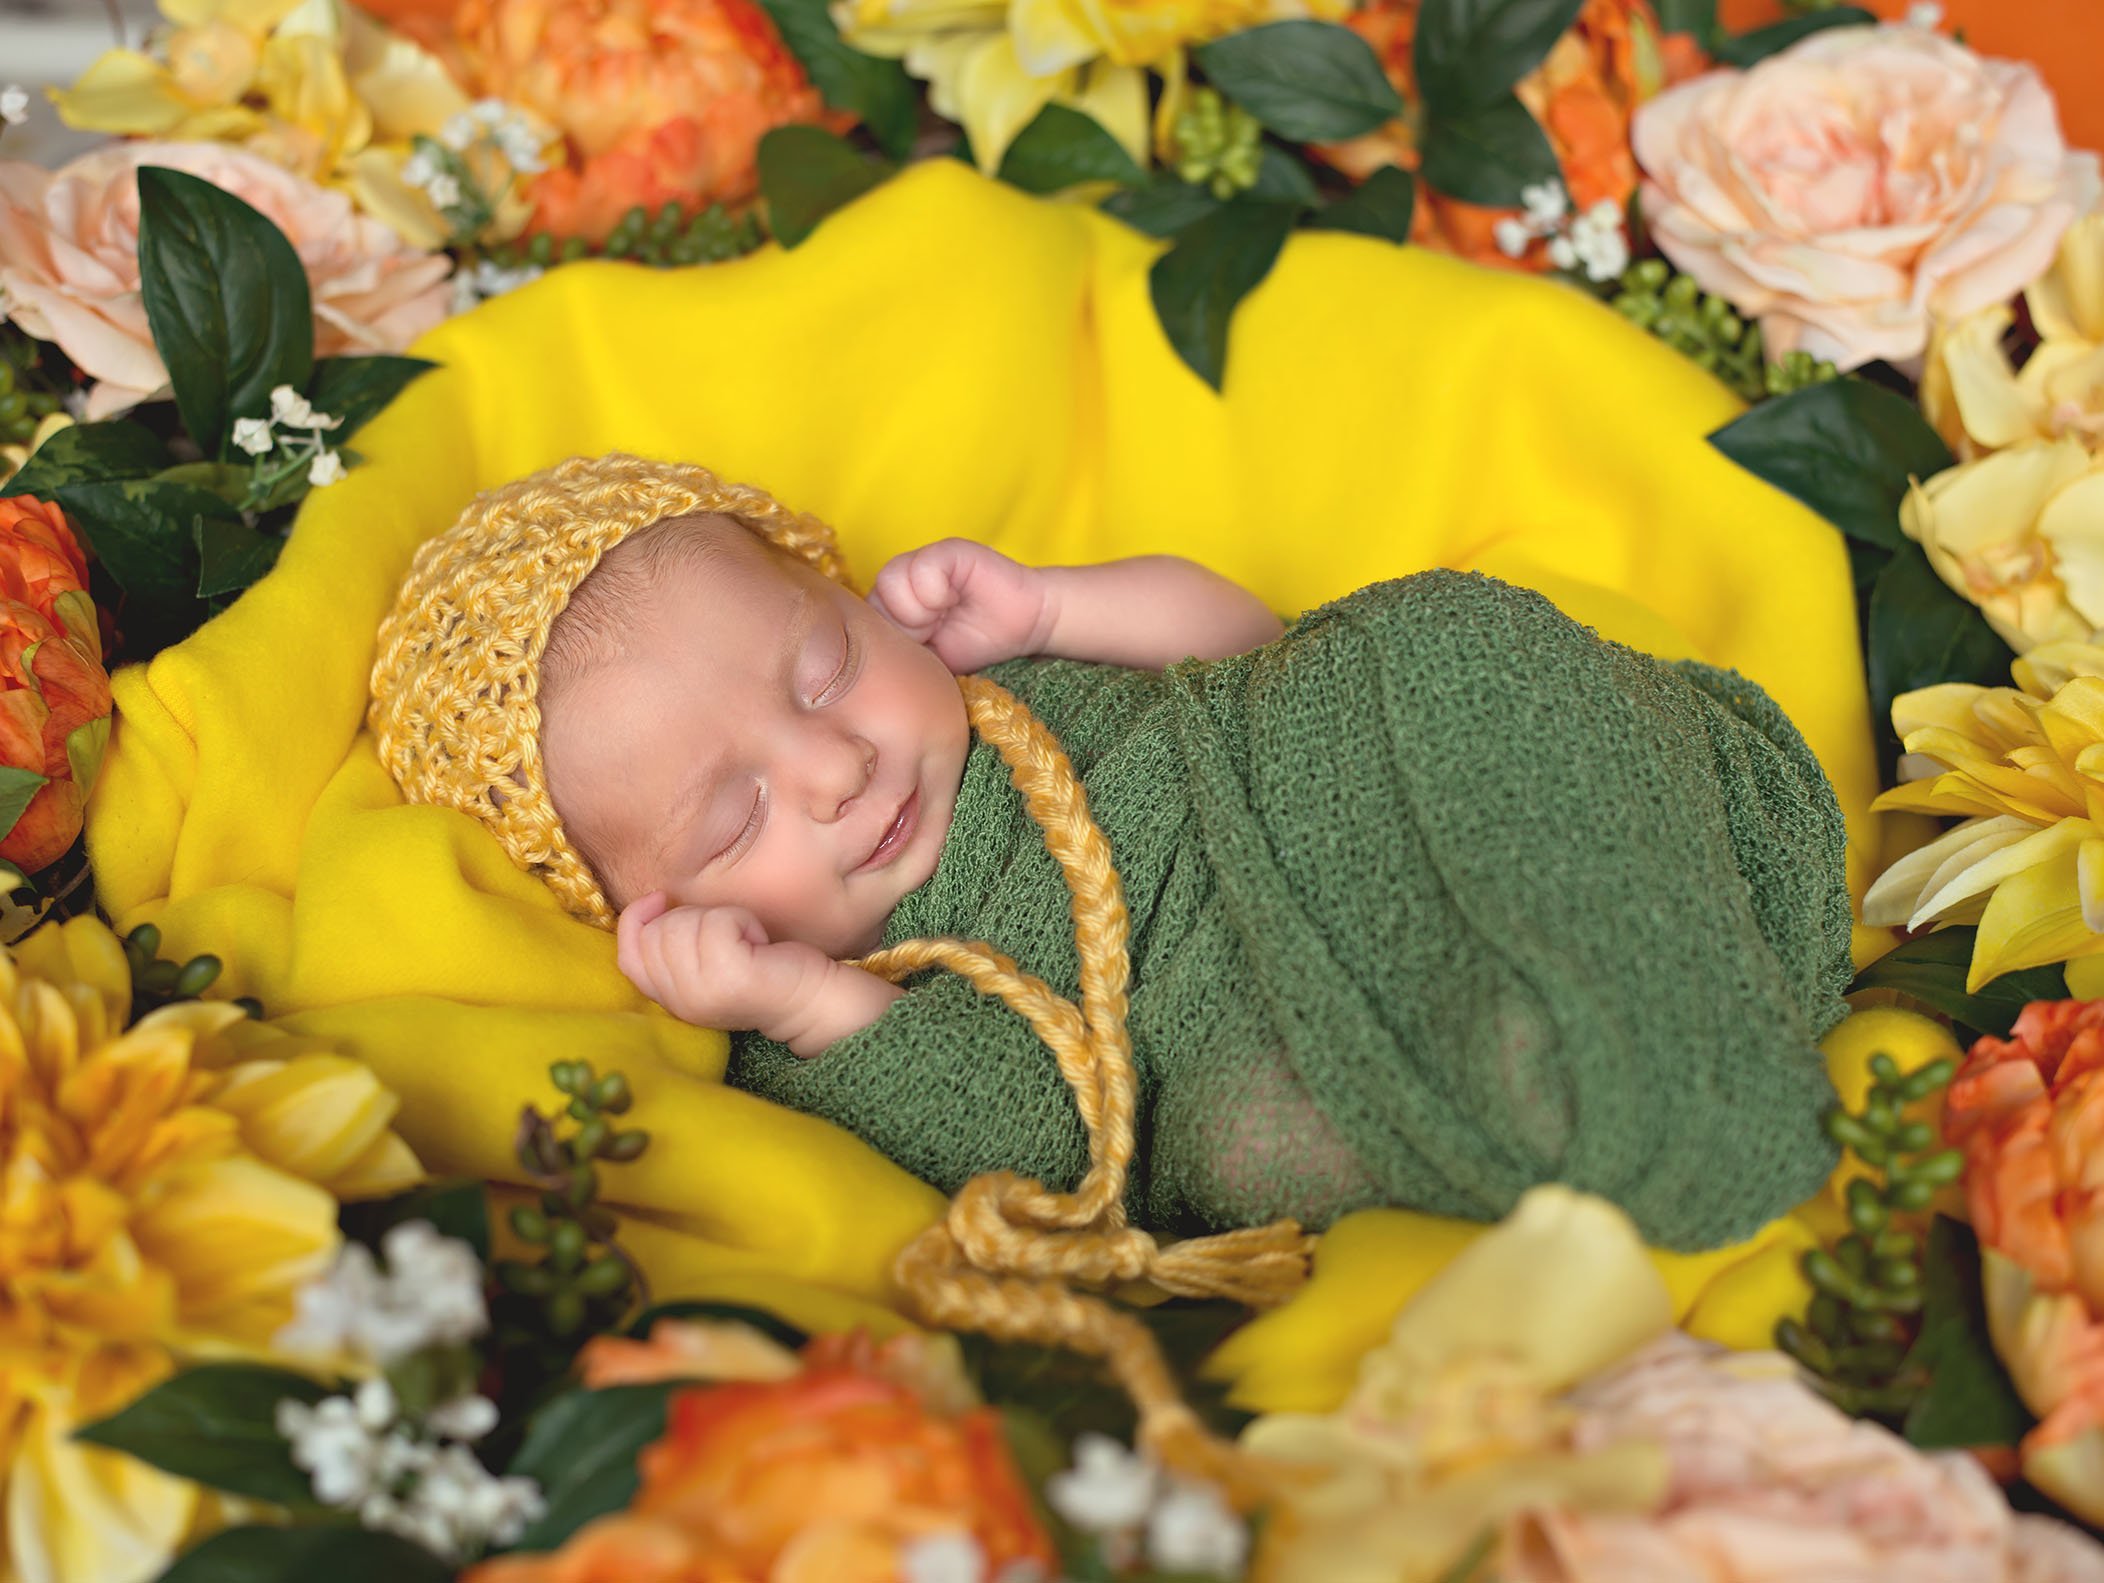 newborn baby girl wrapped in green with a yellow bonnet surrounded by yellow and orange flowers